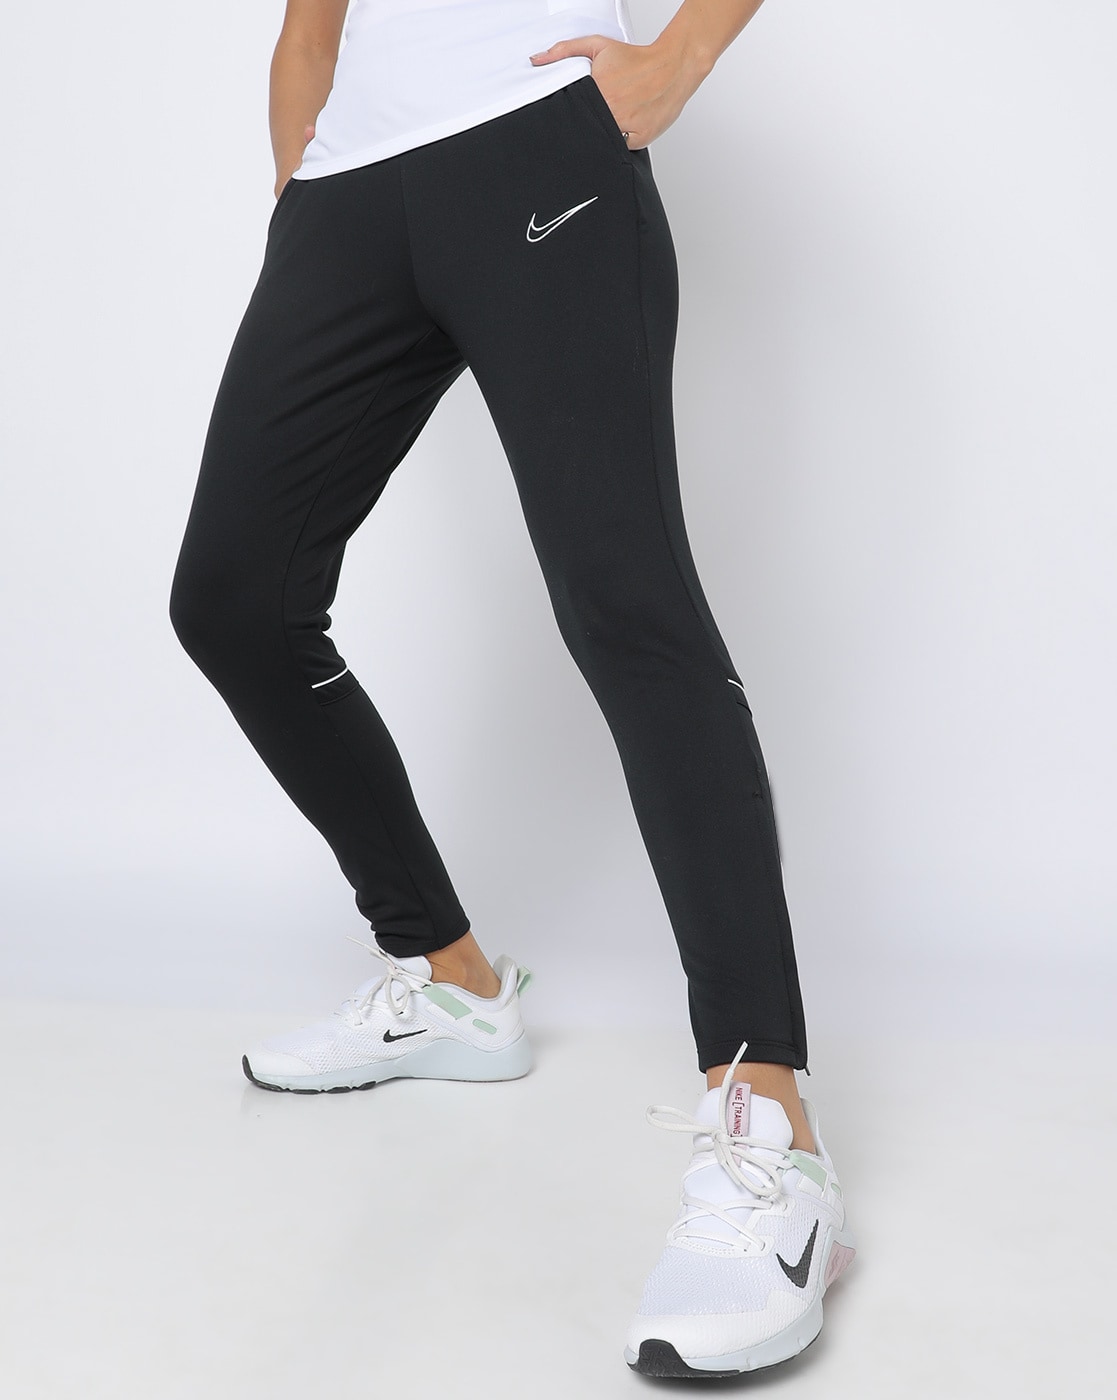 8 Best Running Pants & Tights for Winter Running [2022 Edition]